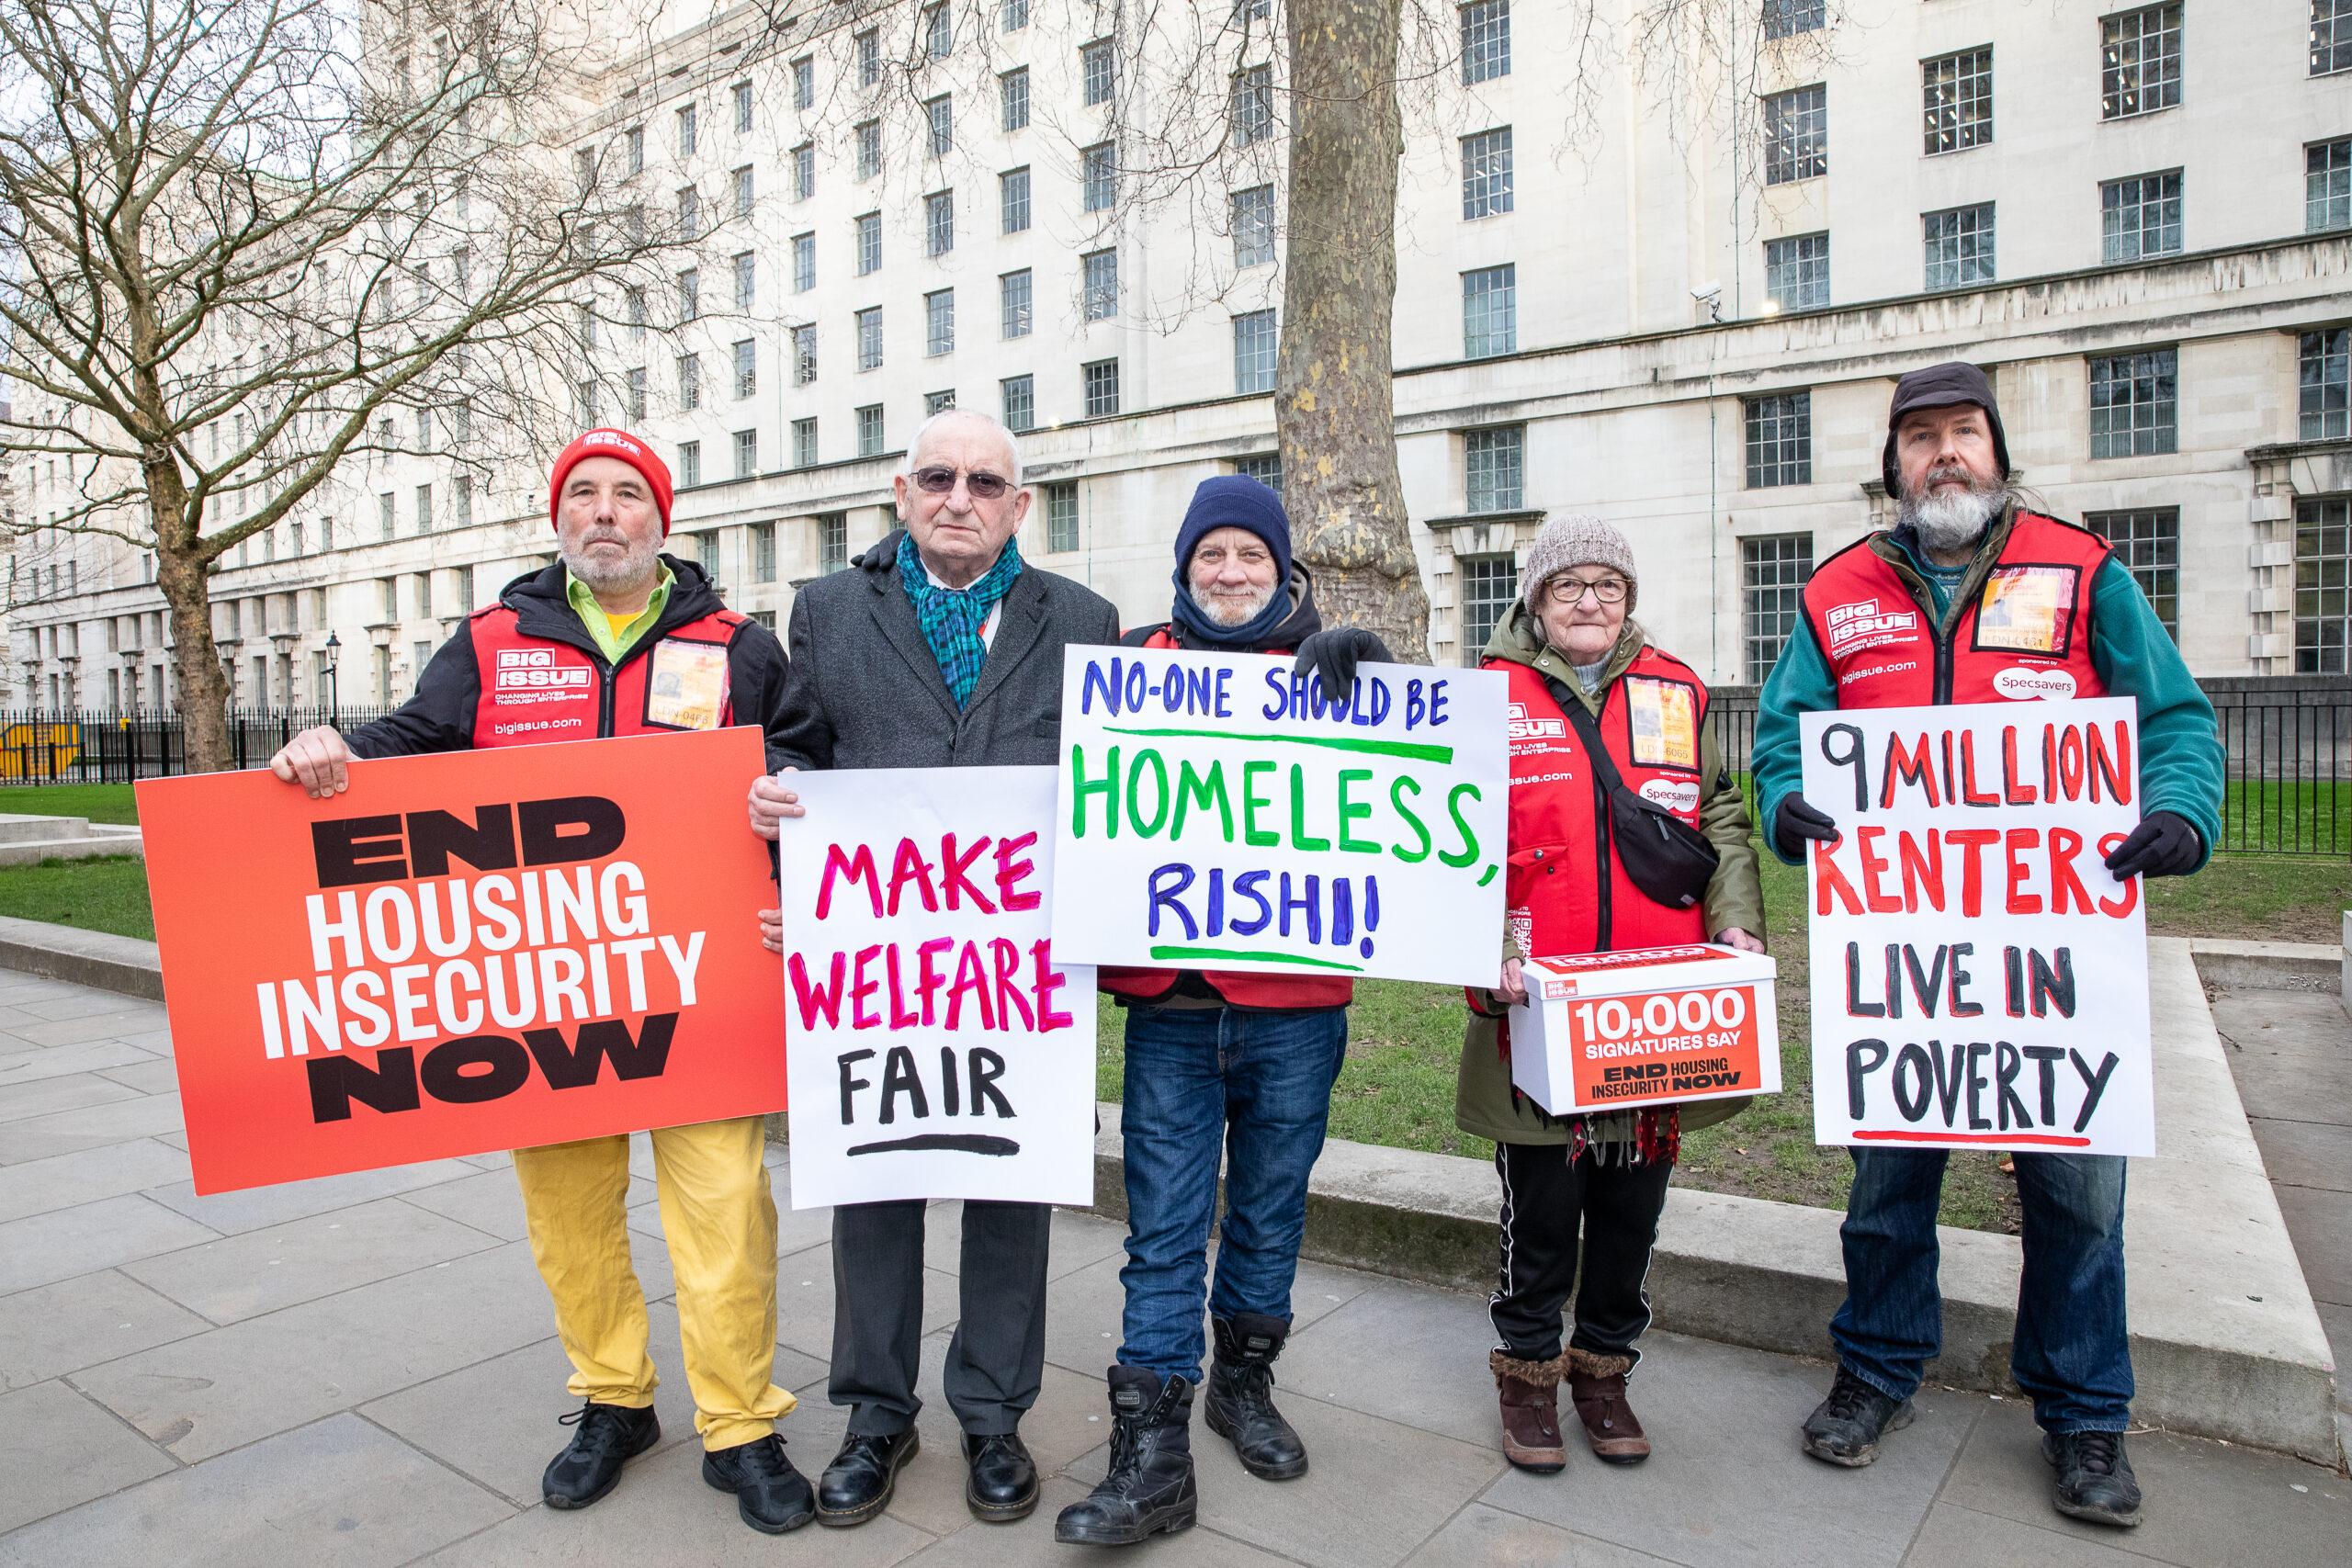 A group of vendors stand on Whitehall, London, calling on the Government to end housing insecutiry.